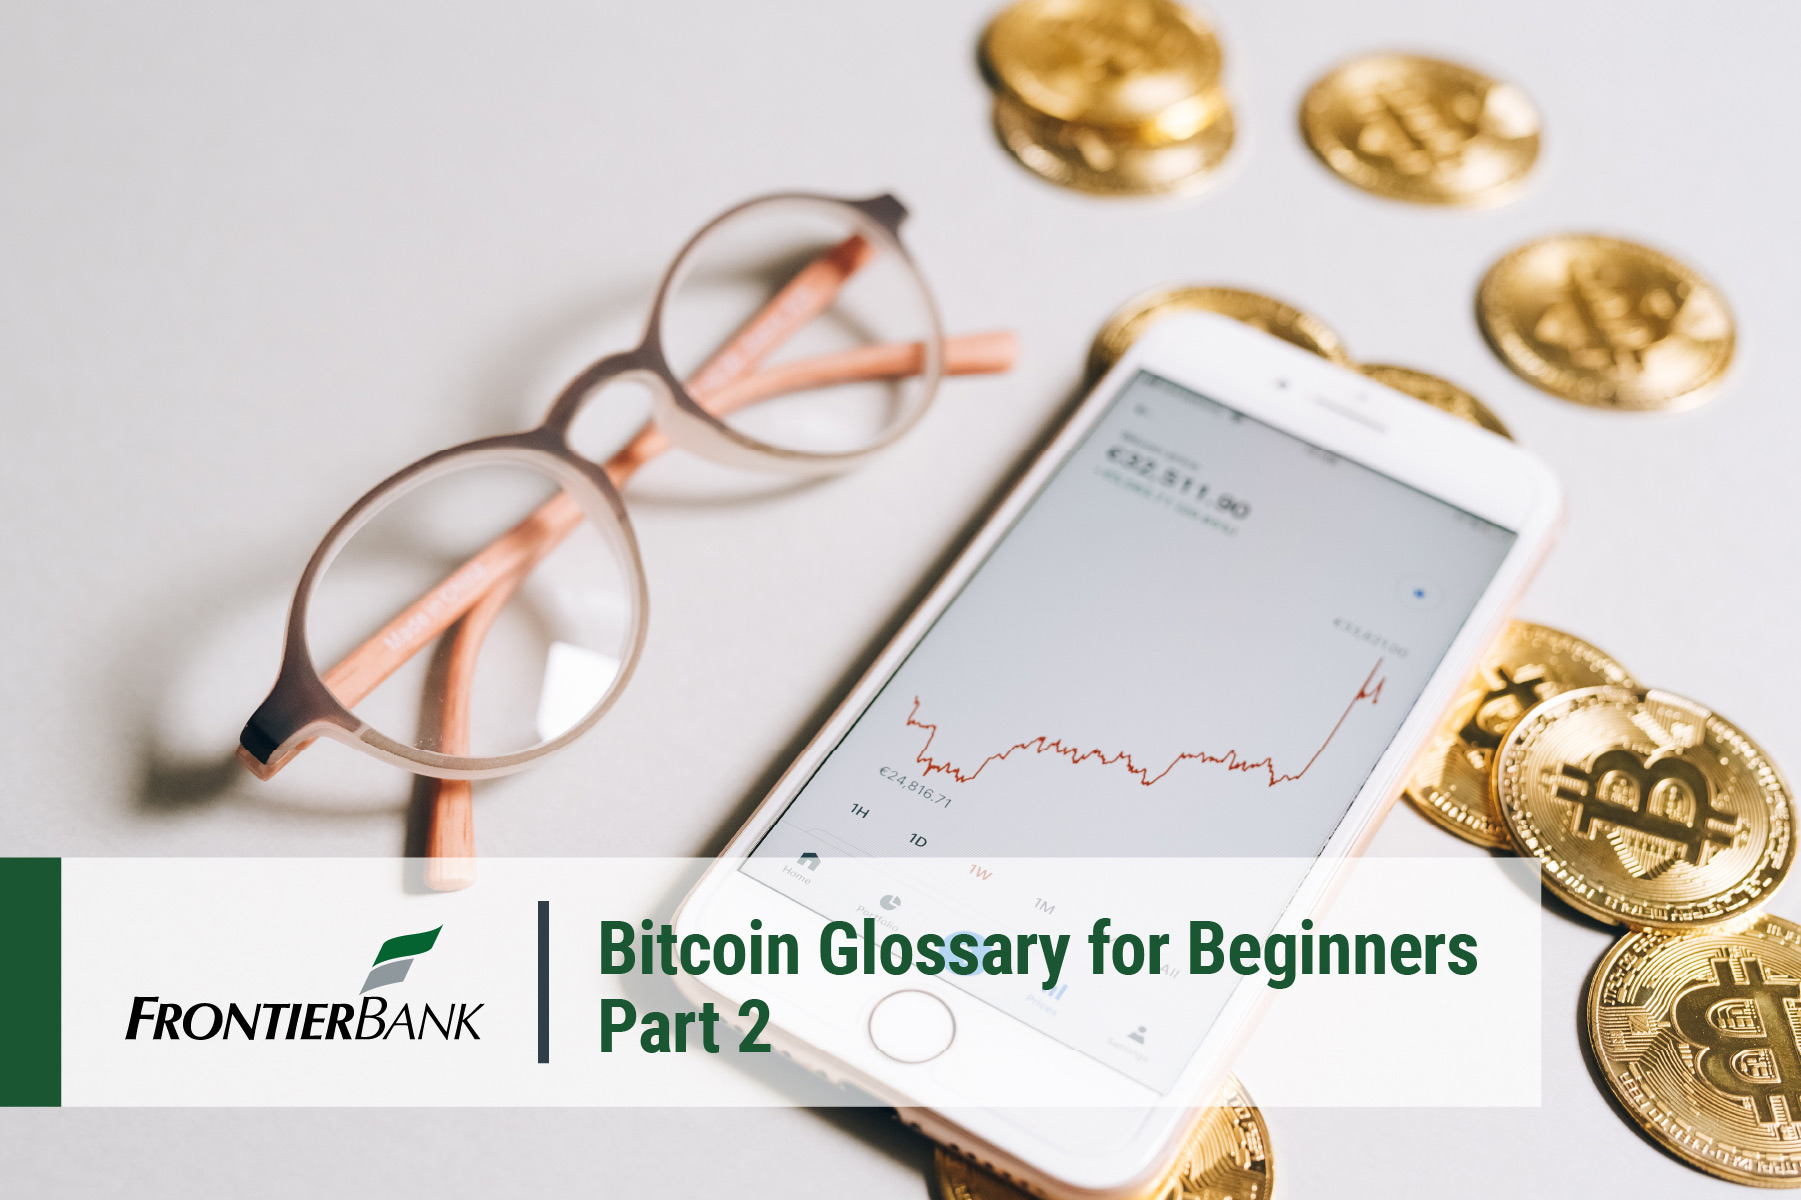 Bitcoin Glossary For Beginners Part 2